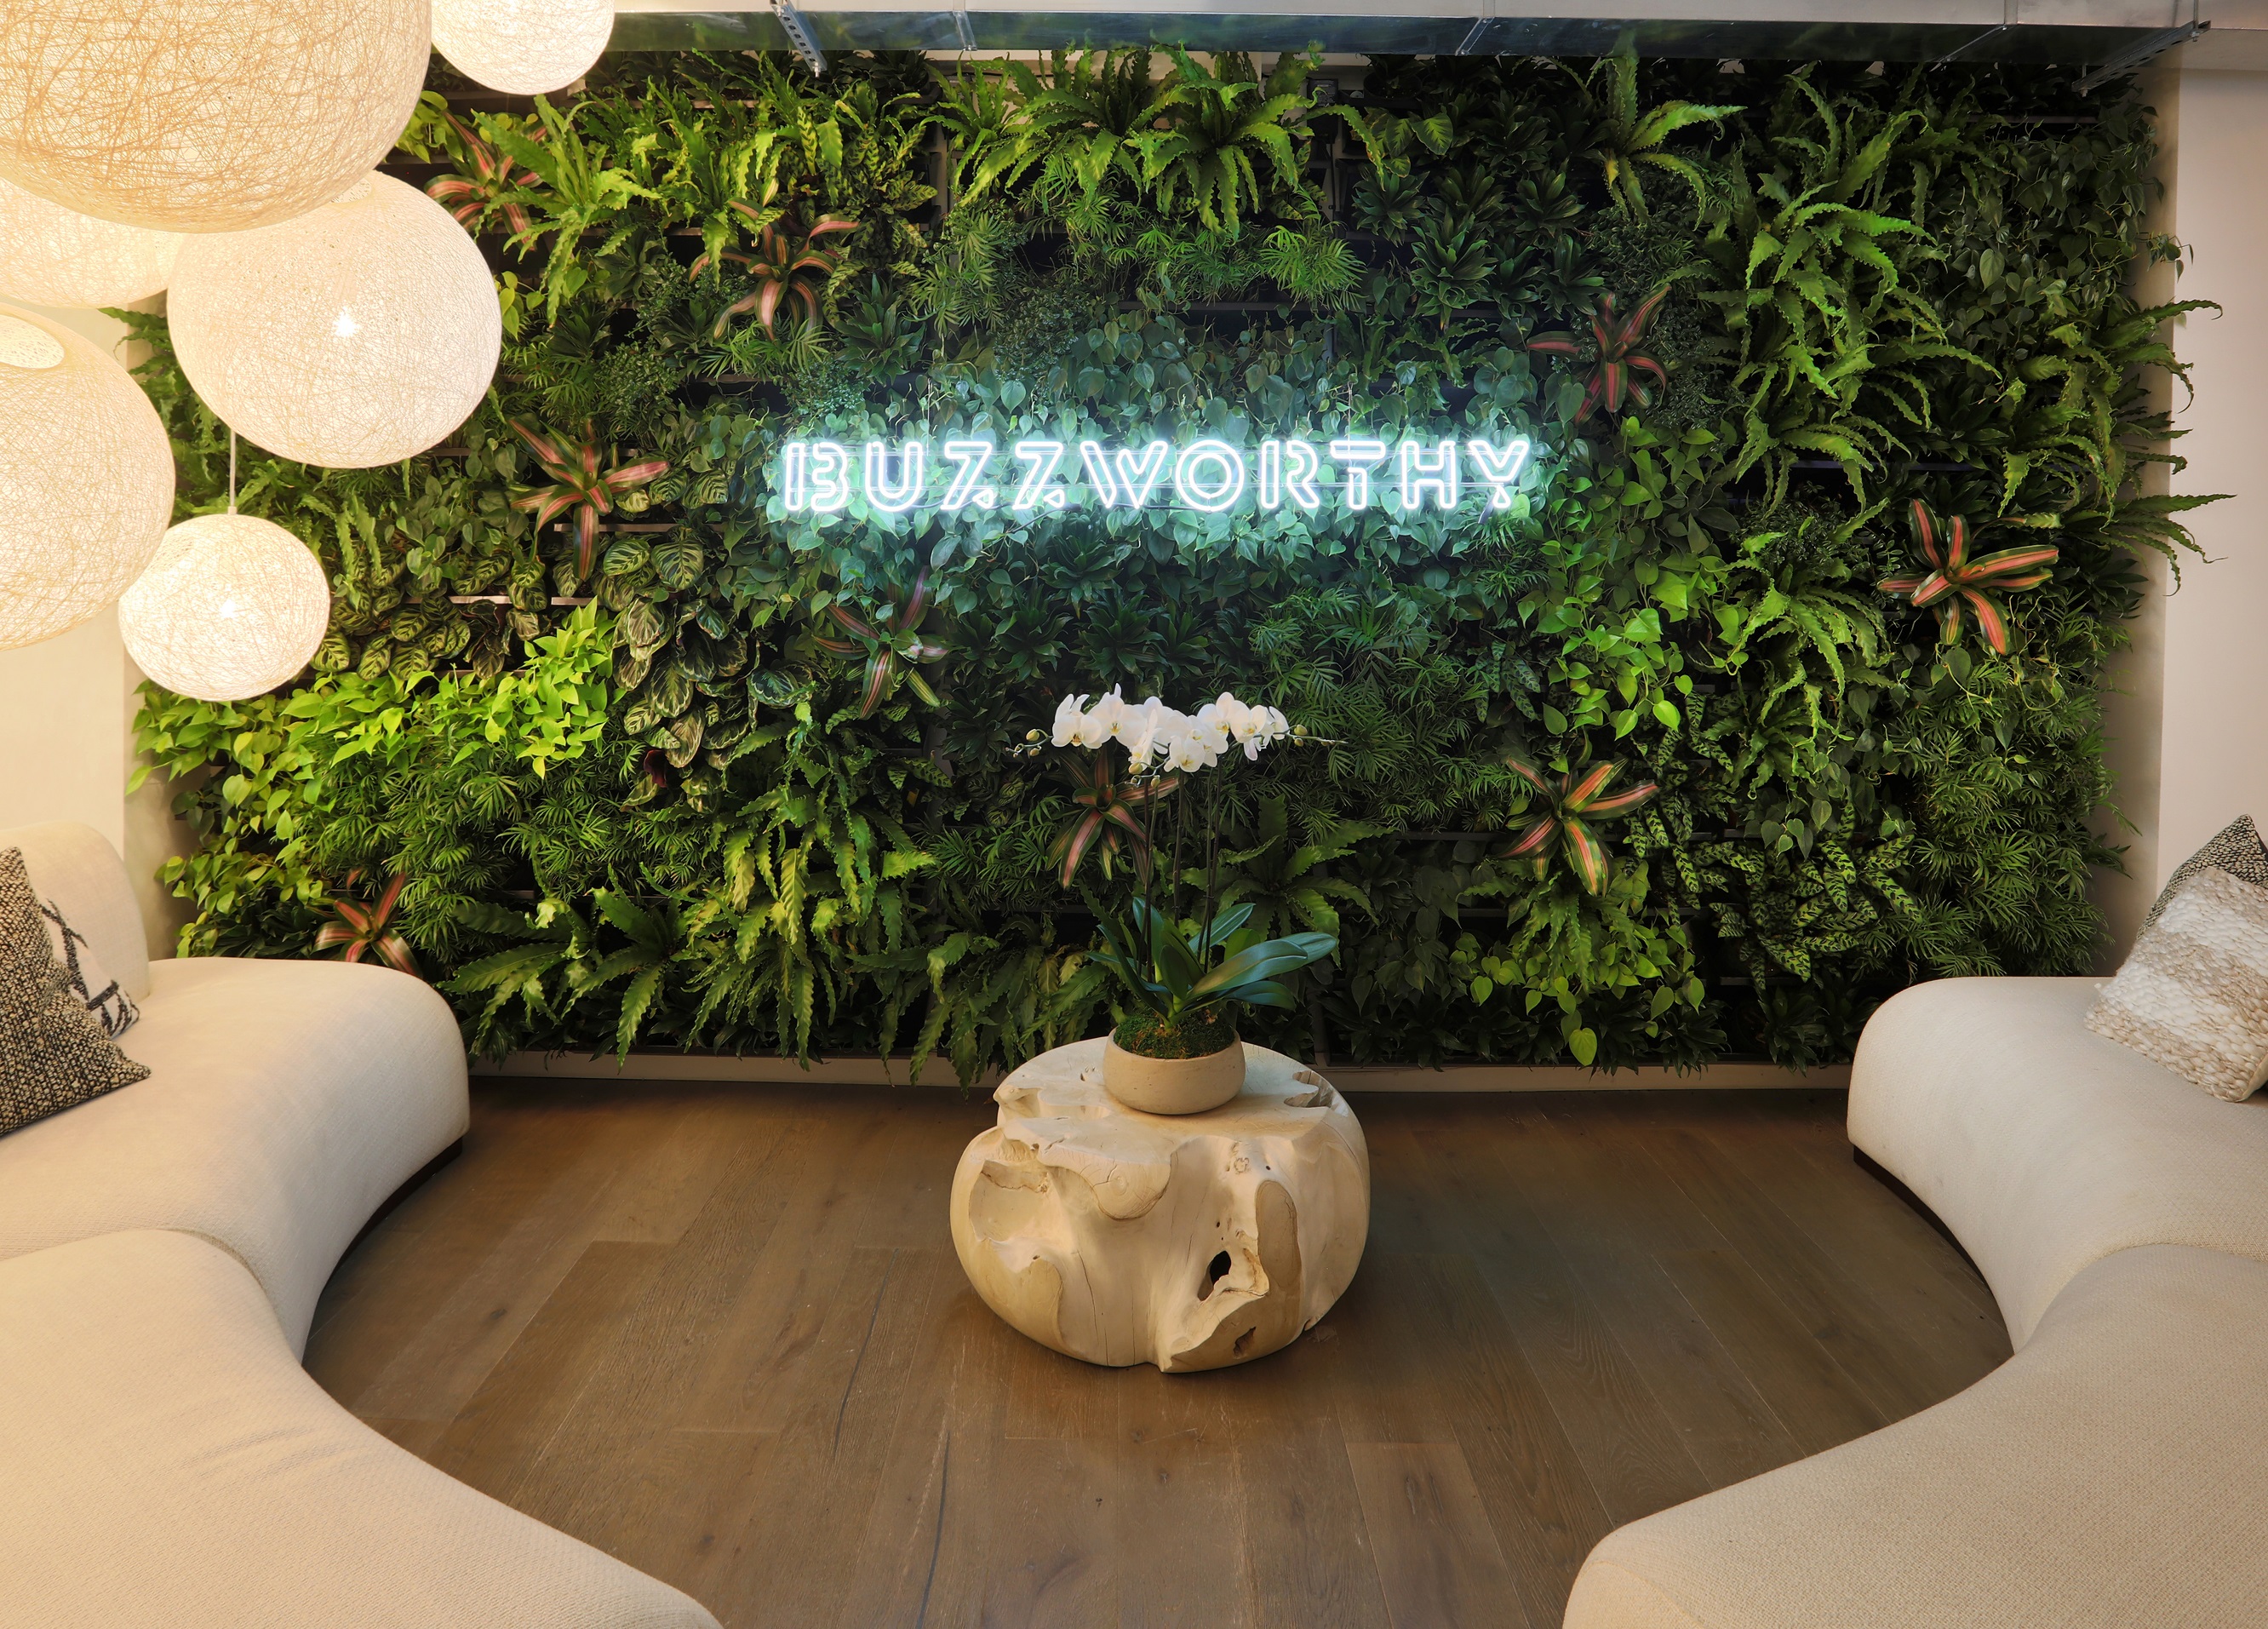 This luxurious living wall greets visitors upon entrance to the office space, nestled behind neon lettering to create a strong